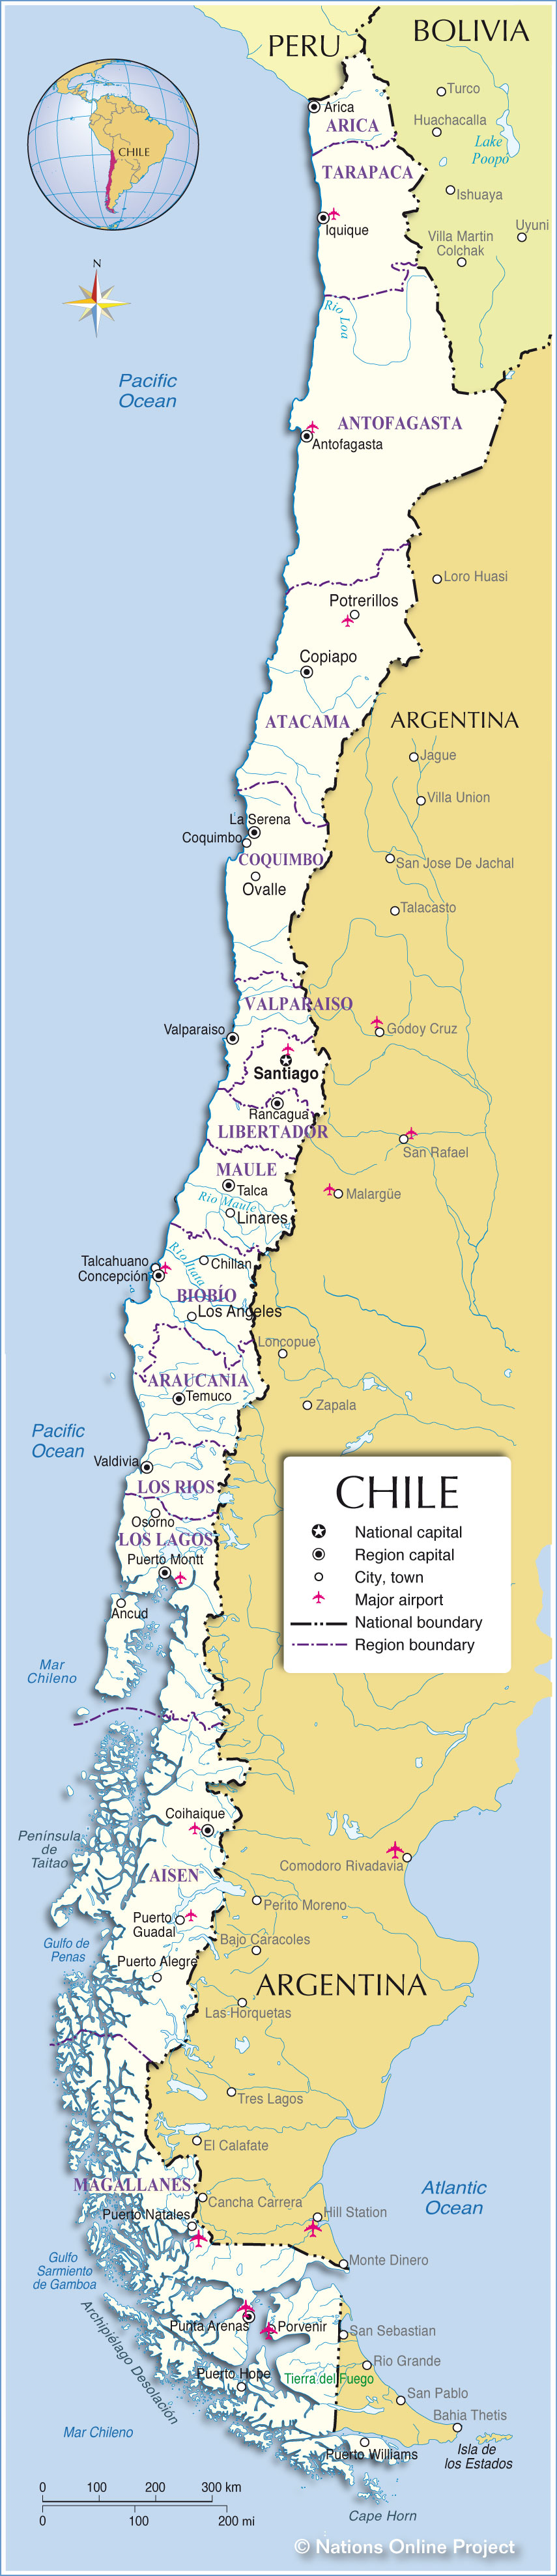 Administrative Map of Chile